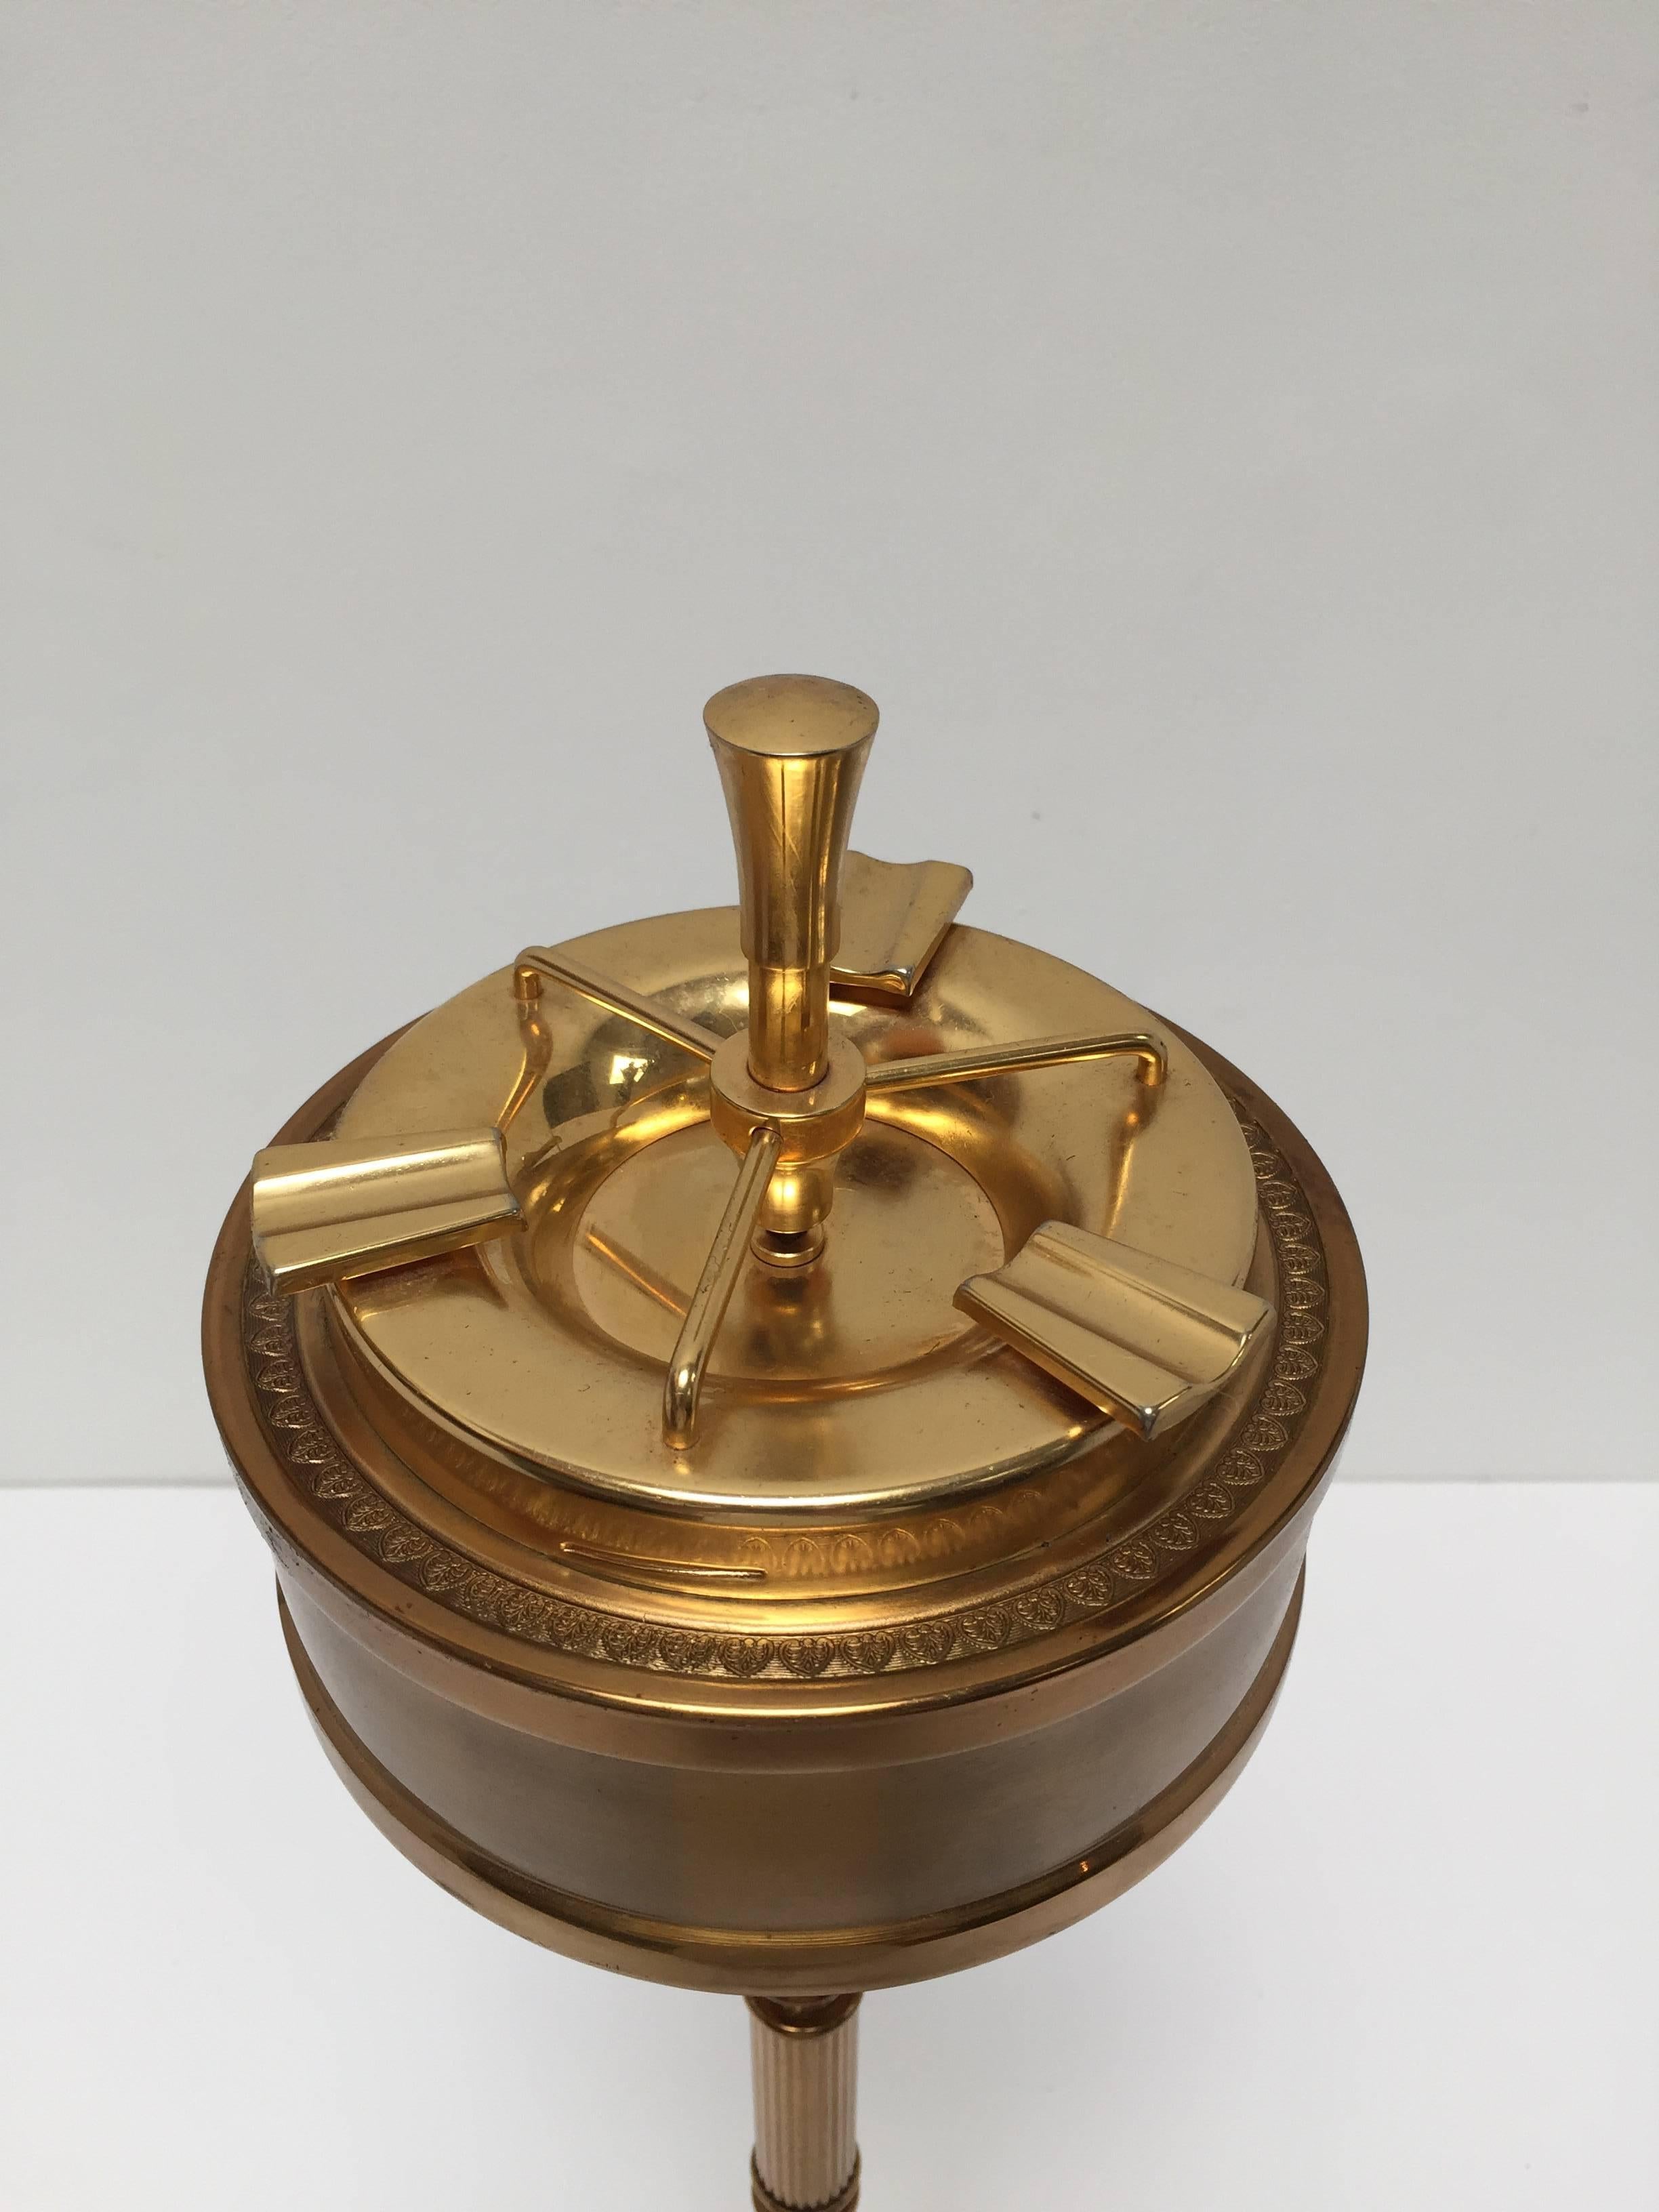 Stunning 1950s faux bamboo brass pillar ashtray by Maison Baguès. 
Excellent patina to brass. 
Center rod pushes down to release ash into lower basin. 
Great sculptural decorative ashtray stand.
Made in Italy.
Dimensions: 28